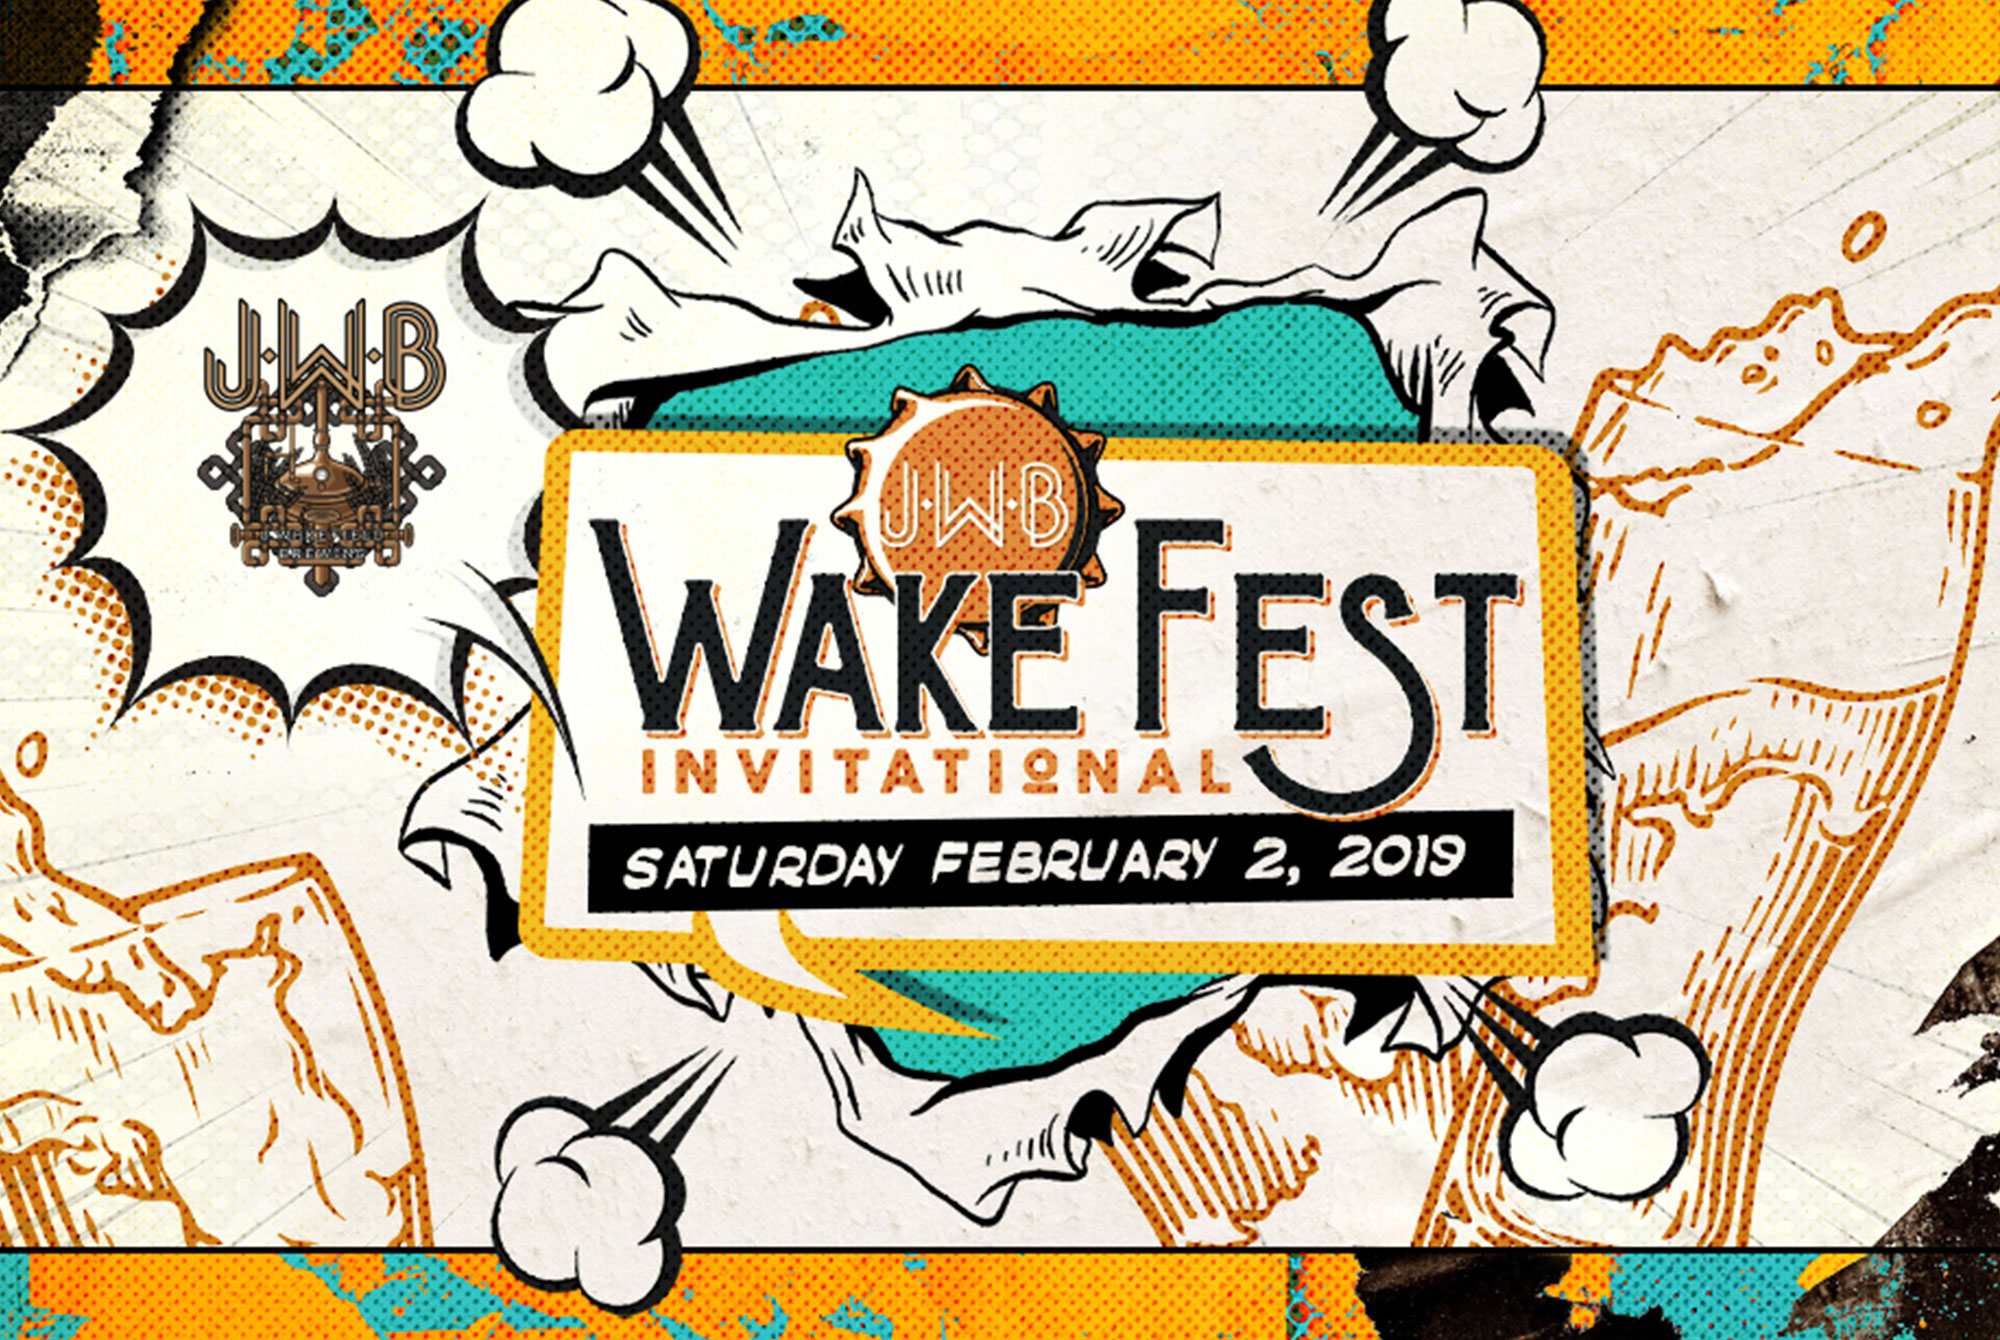 The 10 Best Breweries to Watch at WakeFest 2019